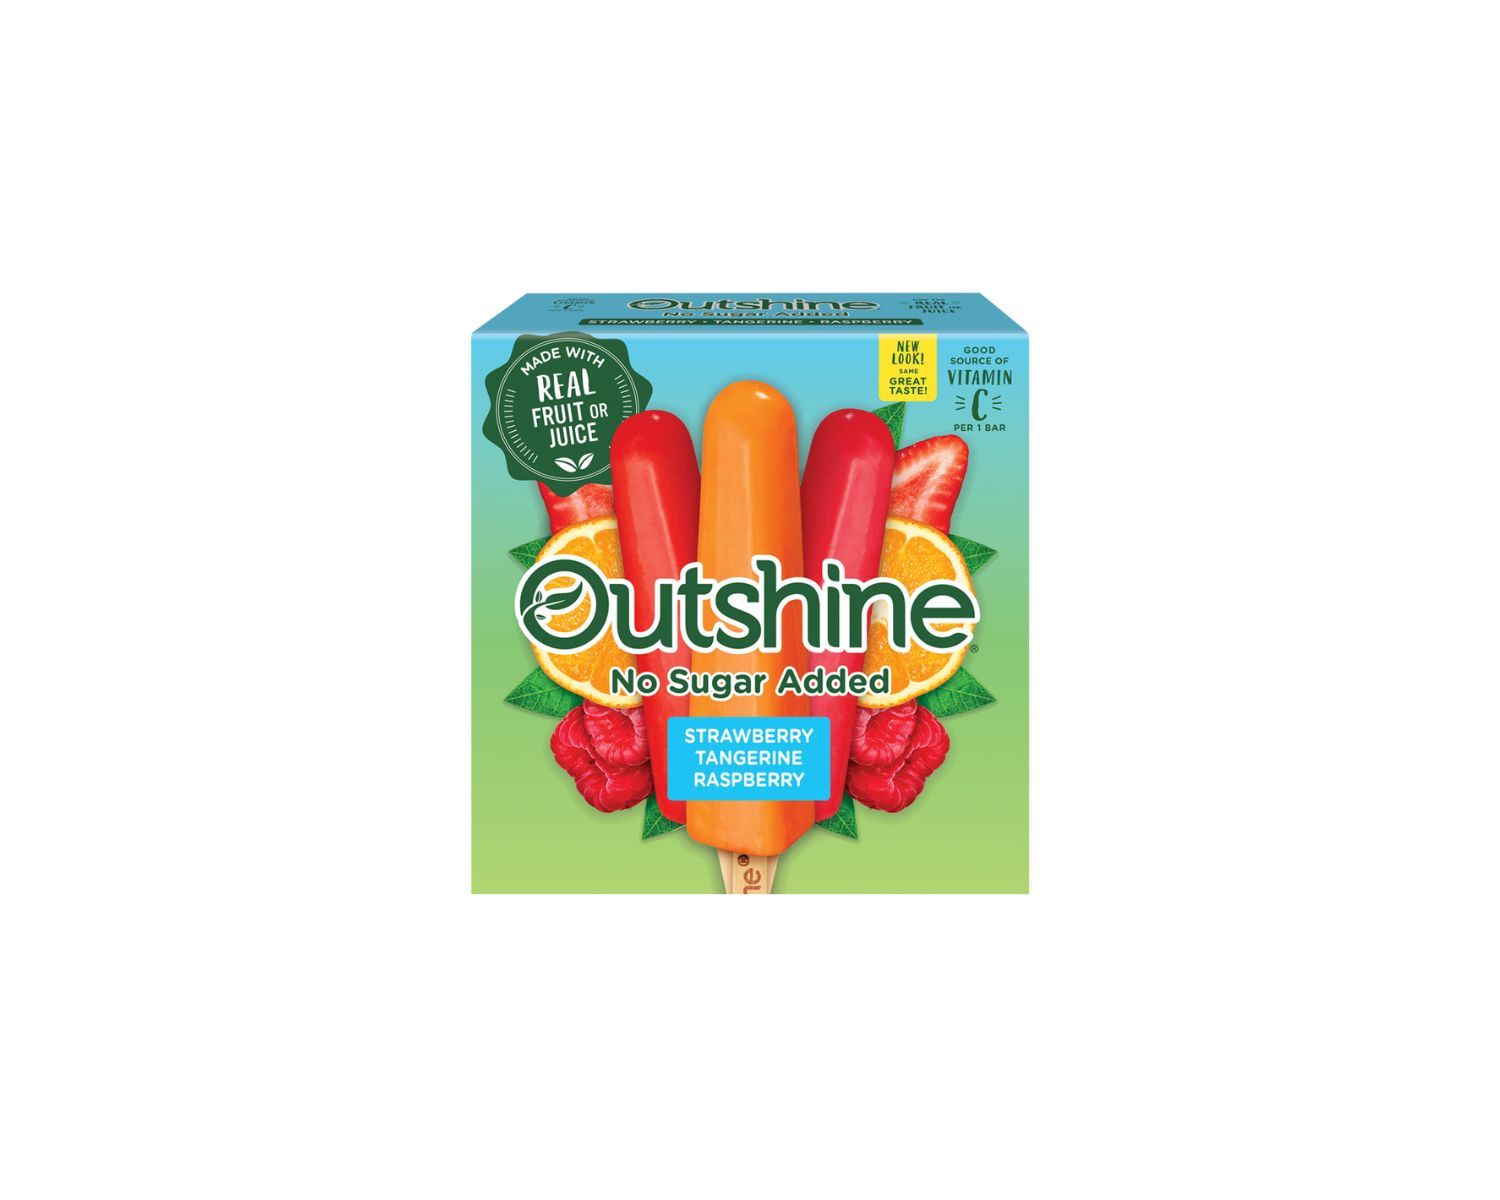 20-outshine-fruit-bars-no-sugar-added-nutrition-facts